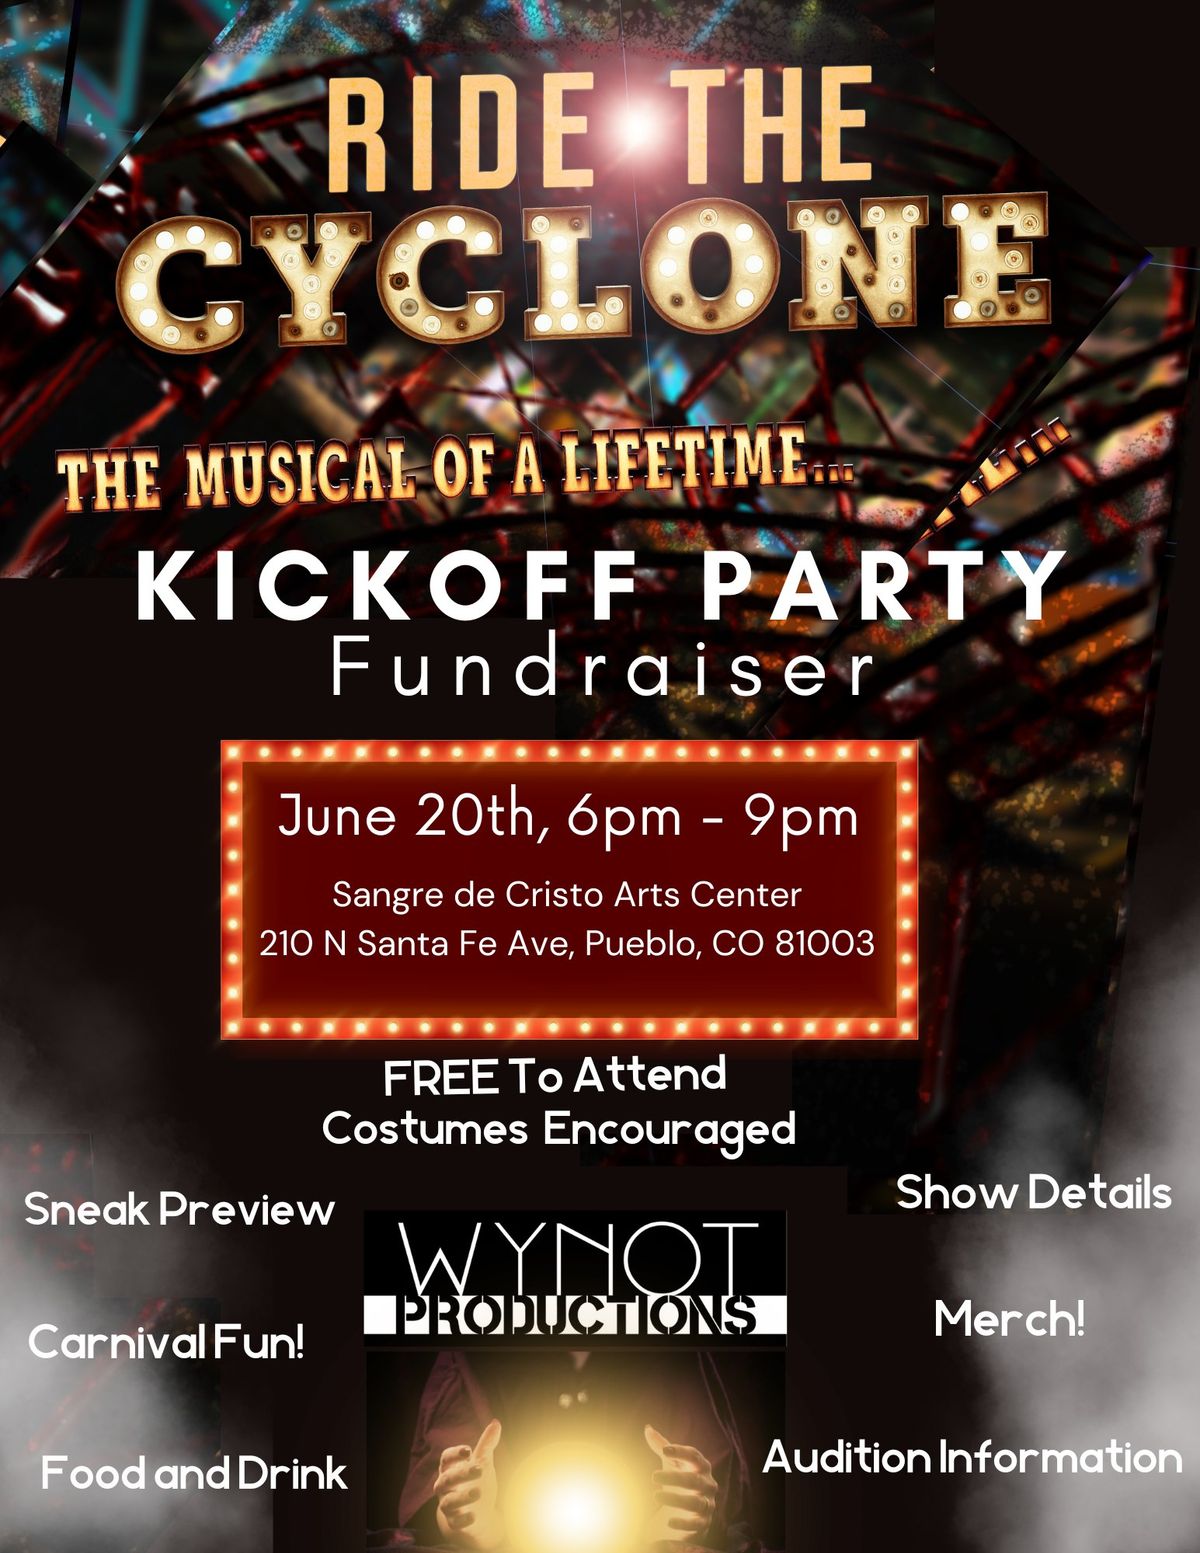 RIDE THE CYCLONE KICKOFF & FUNDRAISING PARTY!